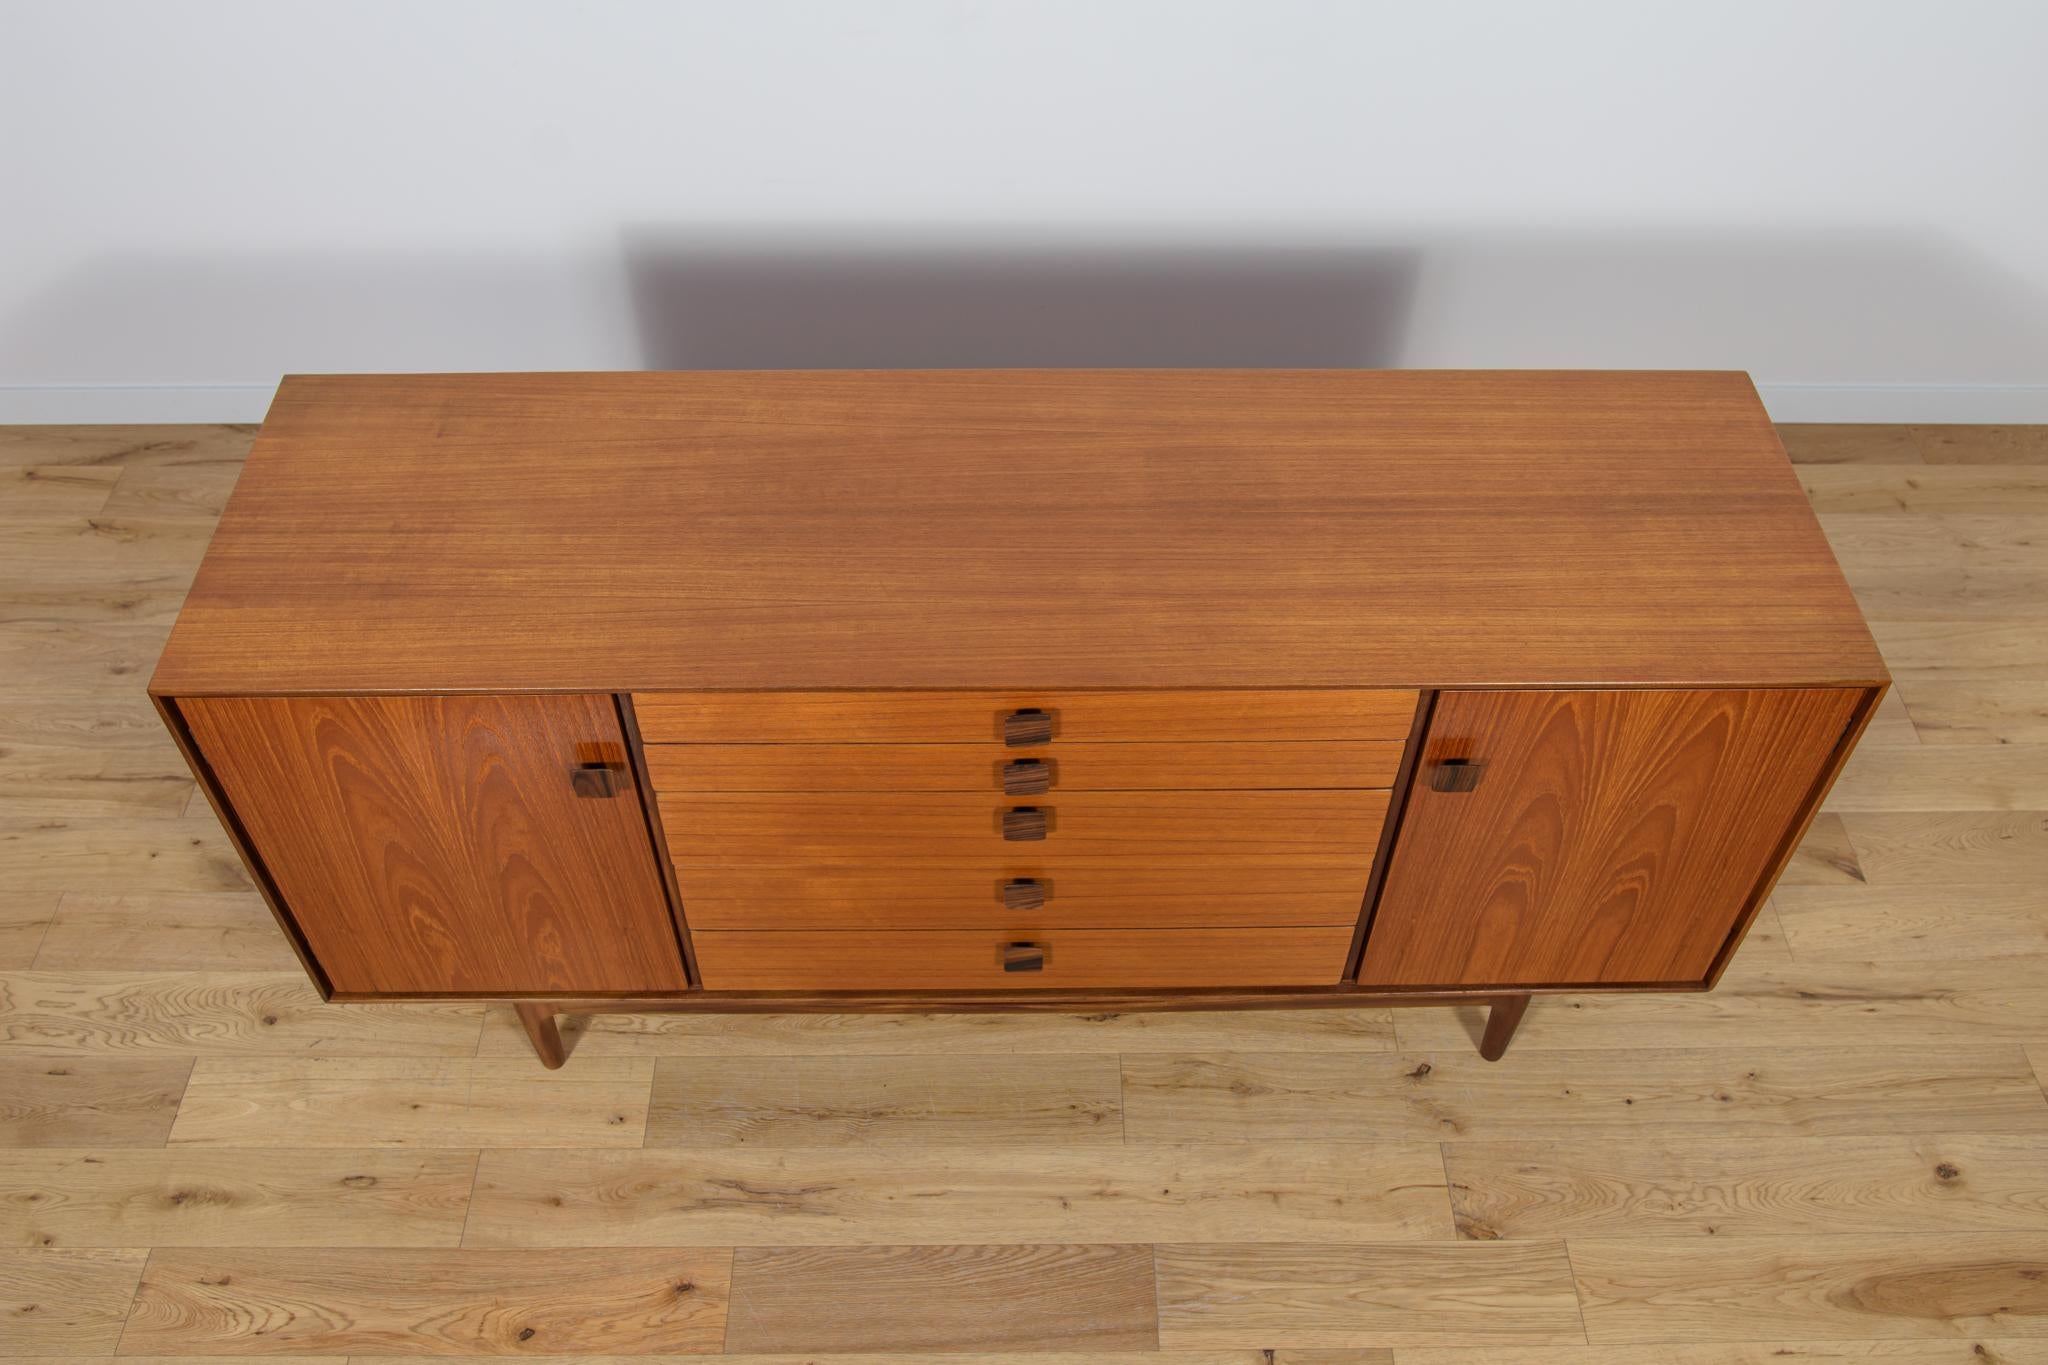 Italian Mid-Century Sideboard by Ib Kofod Larsen for G-Plan, 1960s For Sale